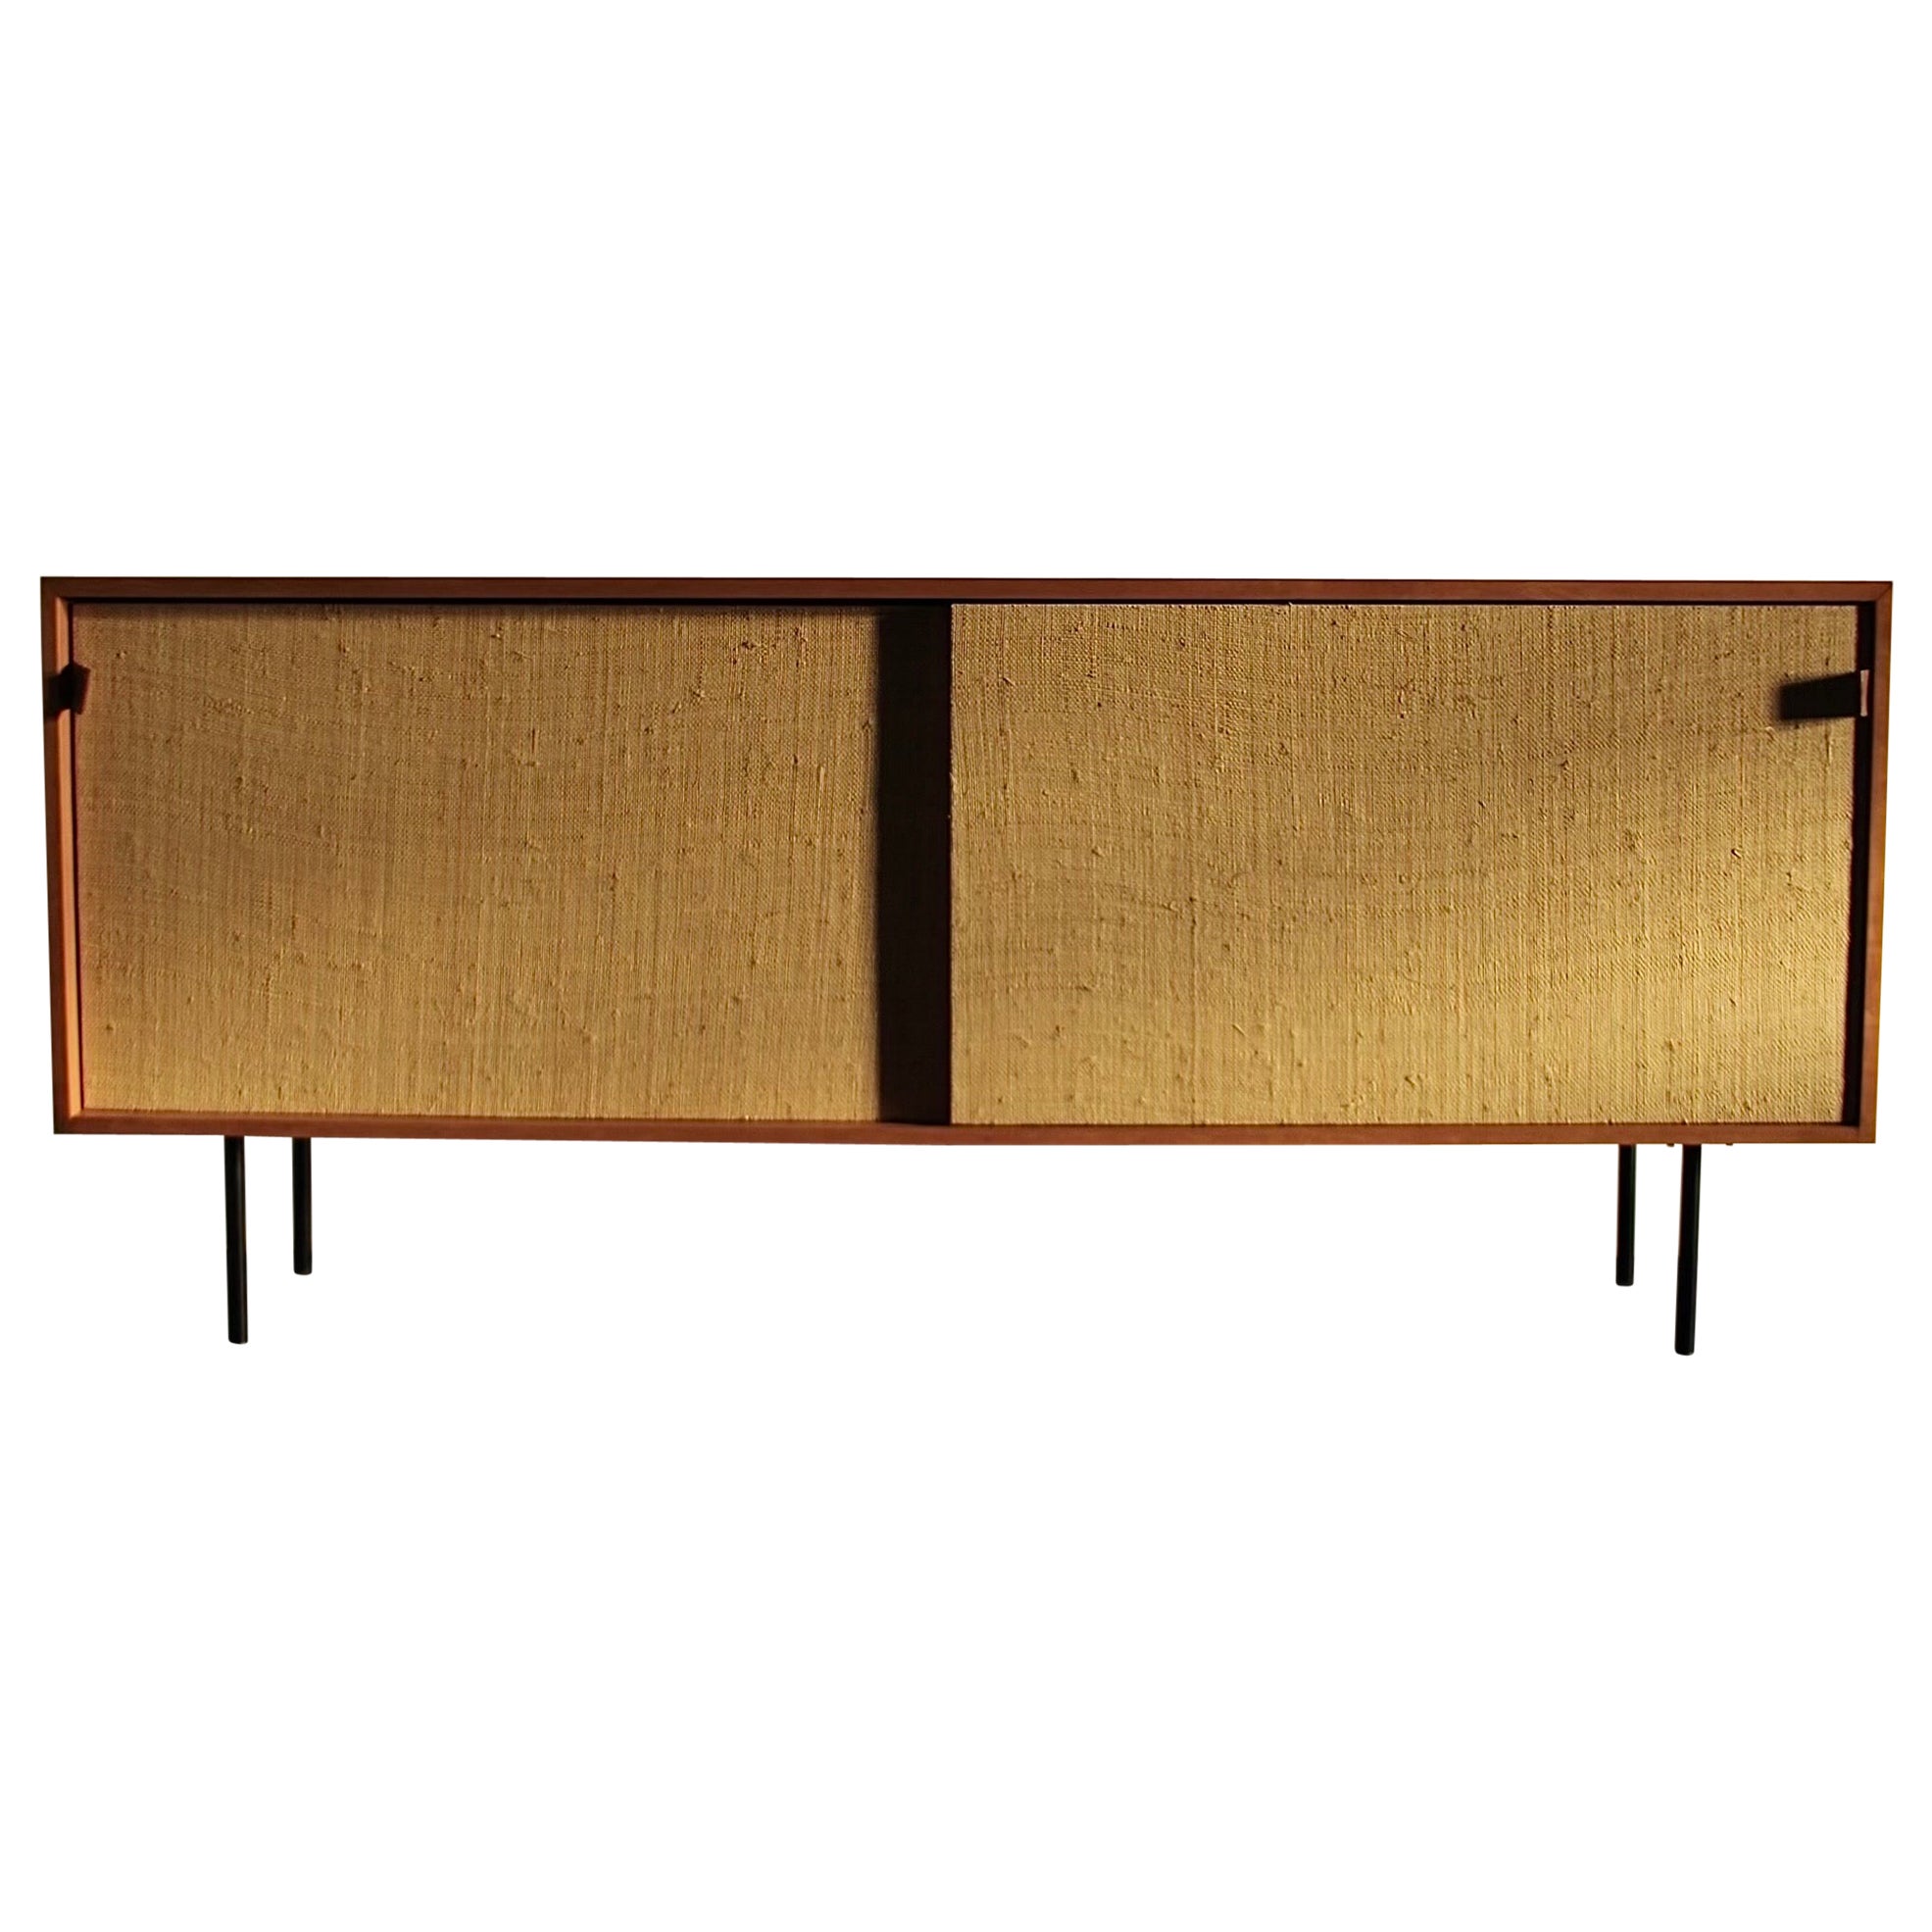 Florence Knoll 'Model 116' Iron Leg and Grass Cloth Credenza for Knoll, 1950s For Sale